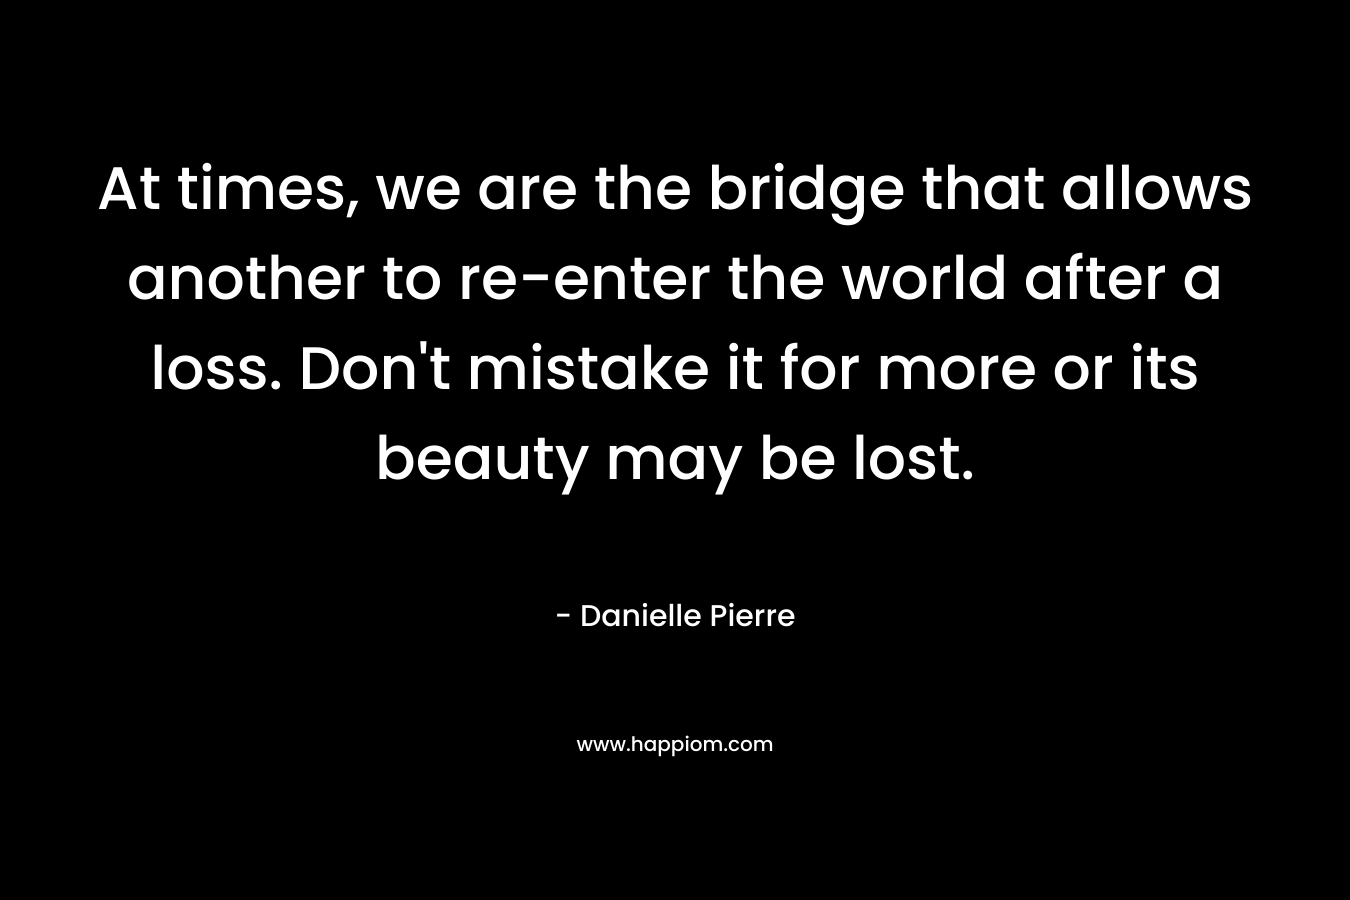 At times, we are the bridge that allows another to re-enter the world after a loss. Don’t mistake it for more or its beauty may be lost. – Danielle Pierre